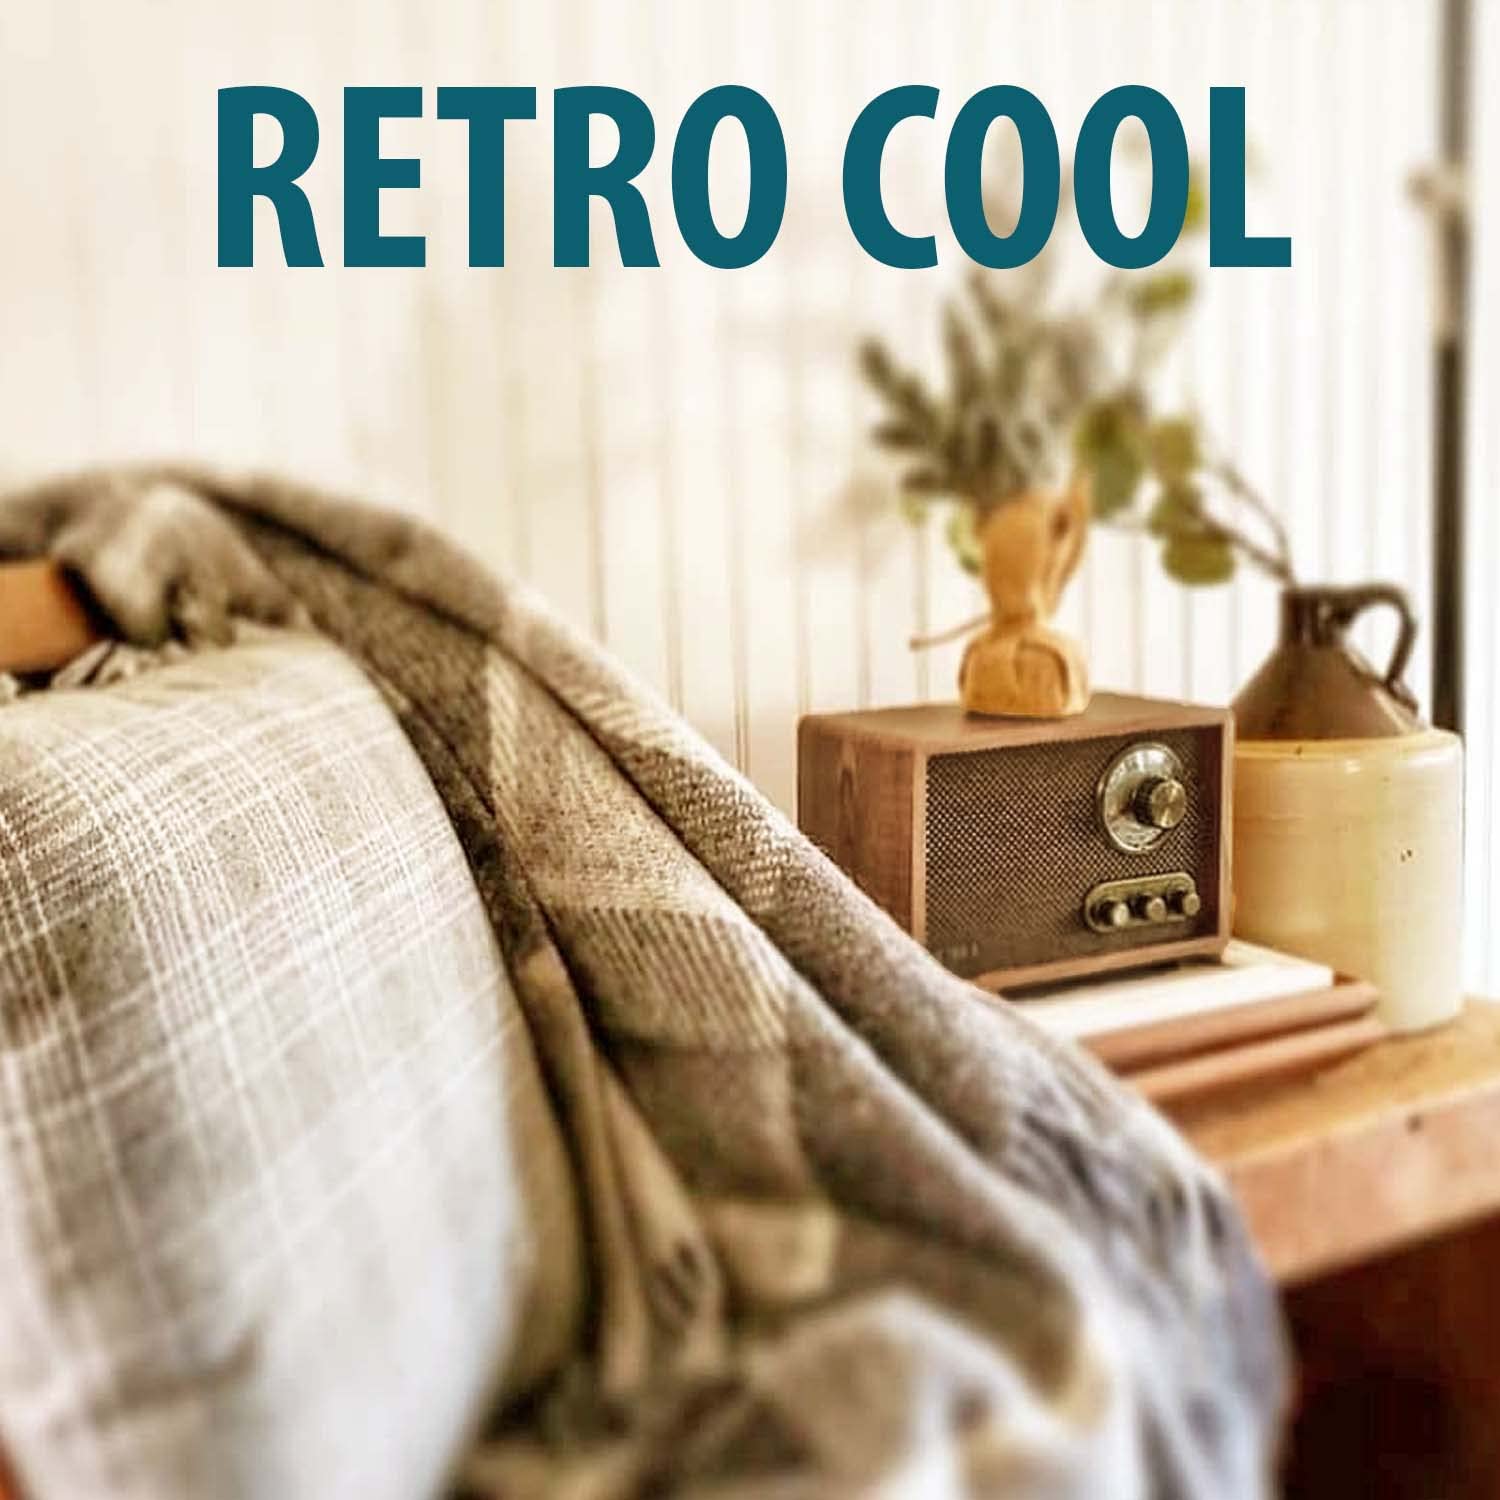 A wooden retro style Bluetooth radio on a table in someone's home. The text reads, "Retro Cool".